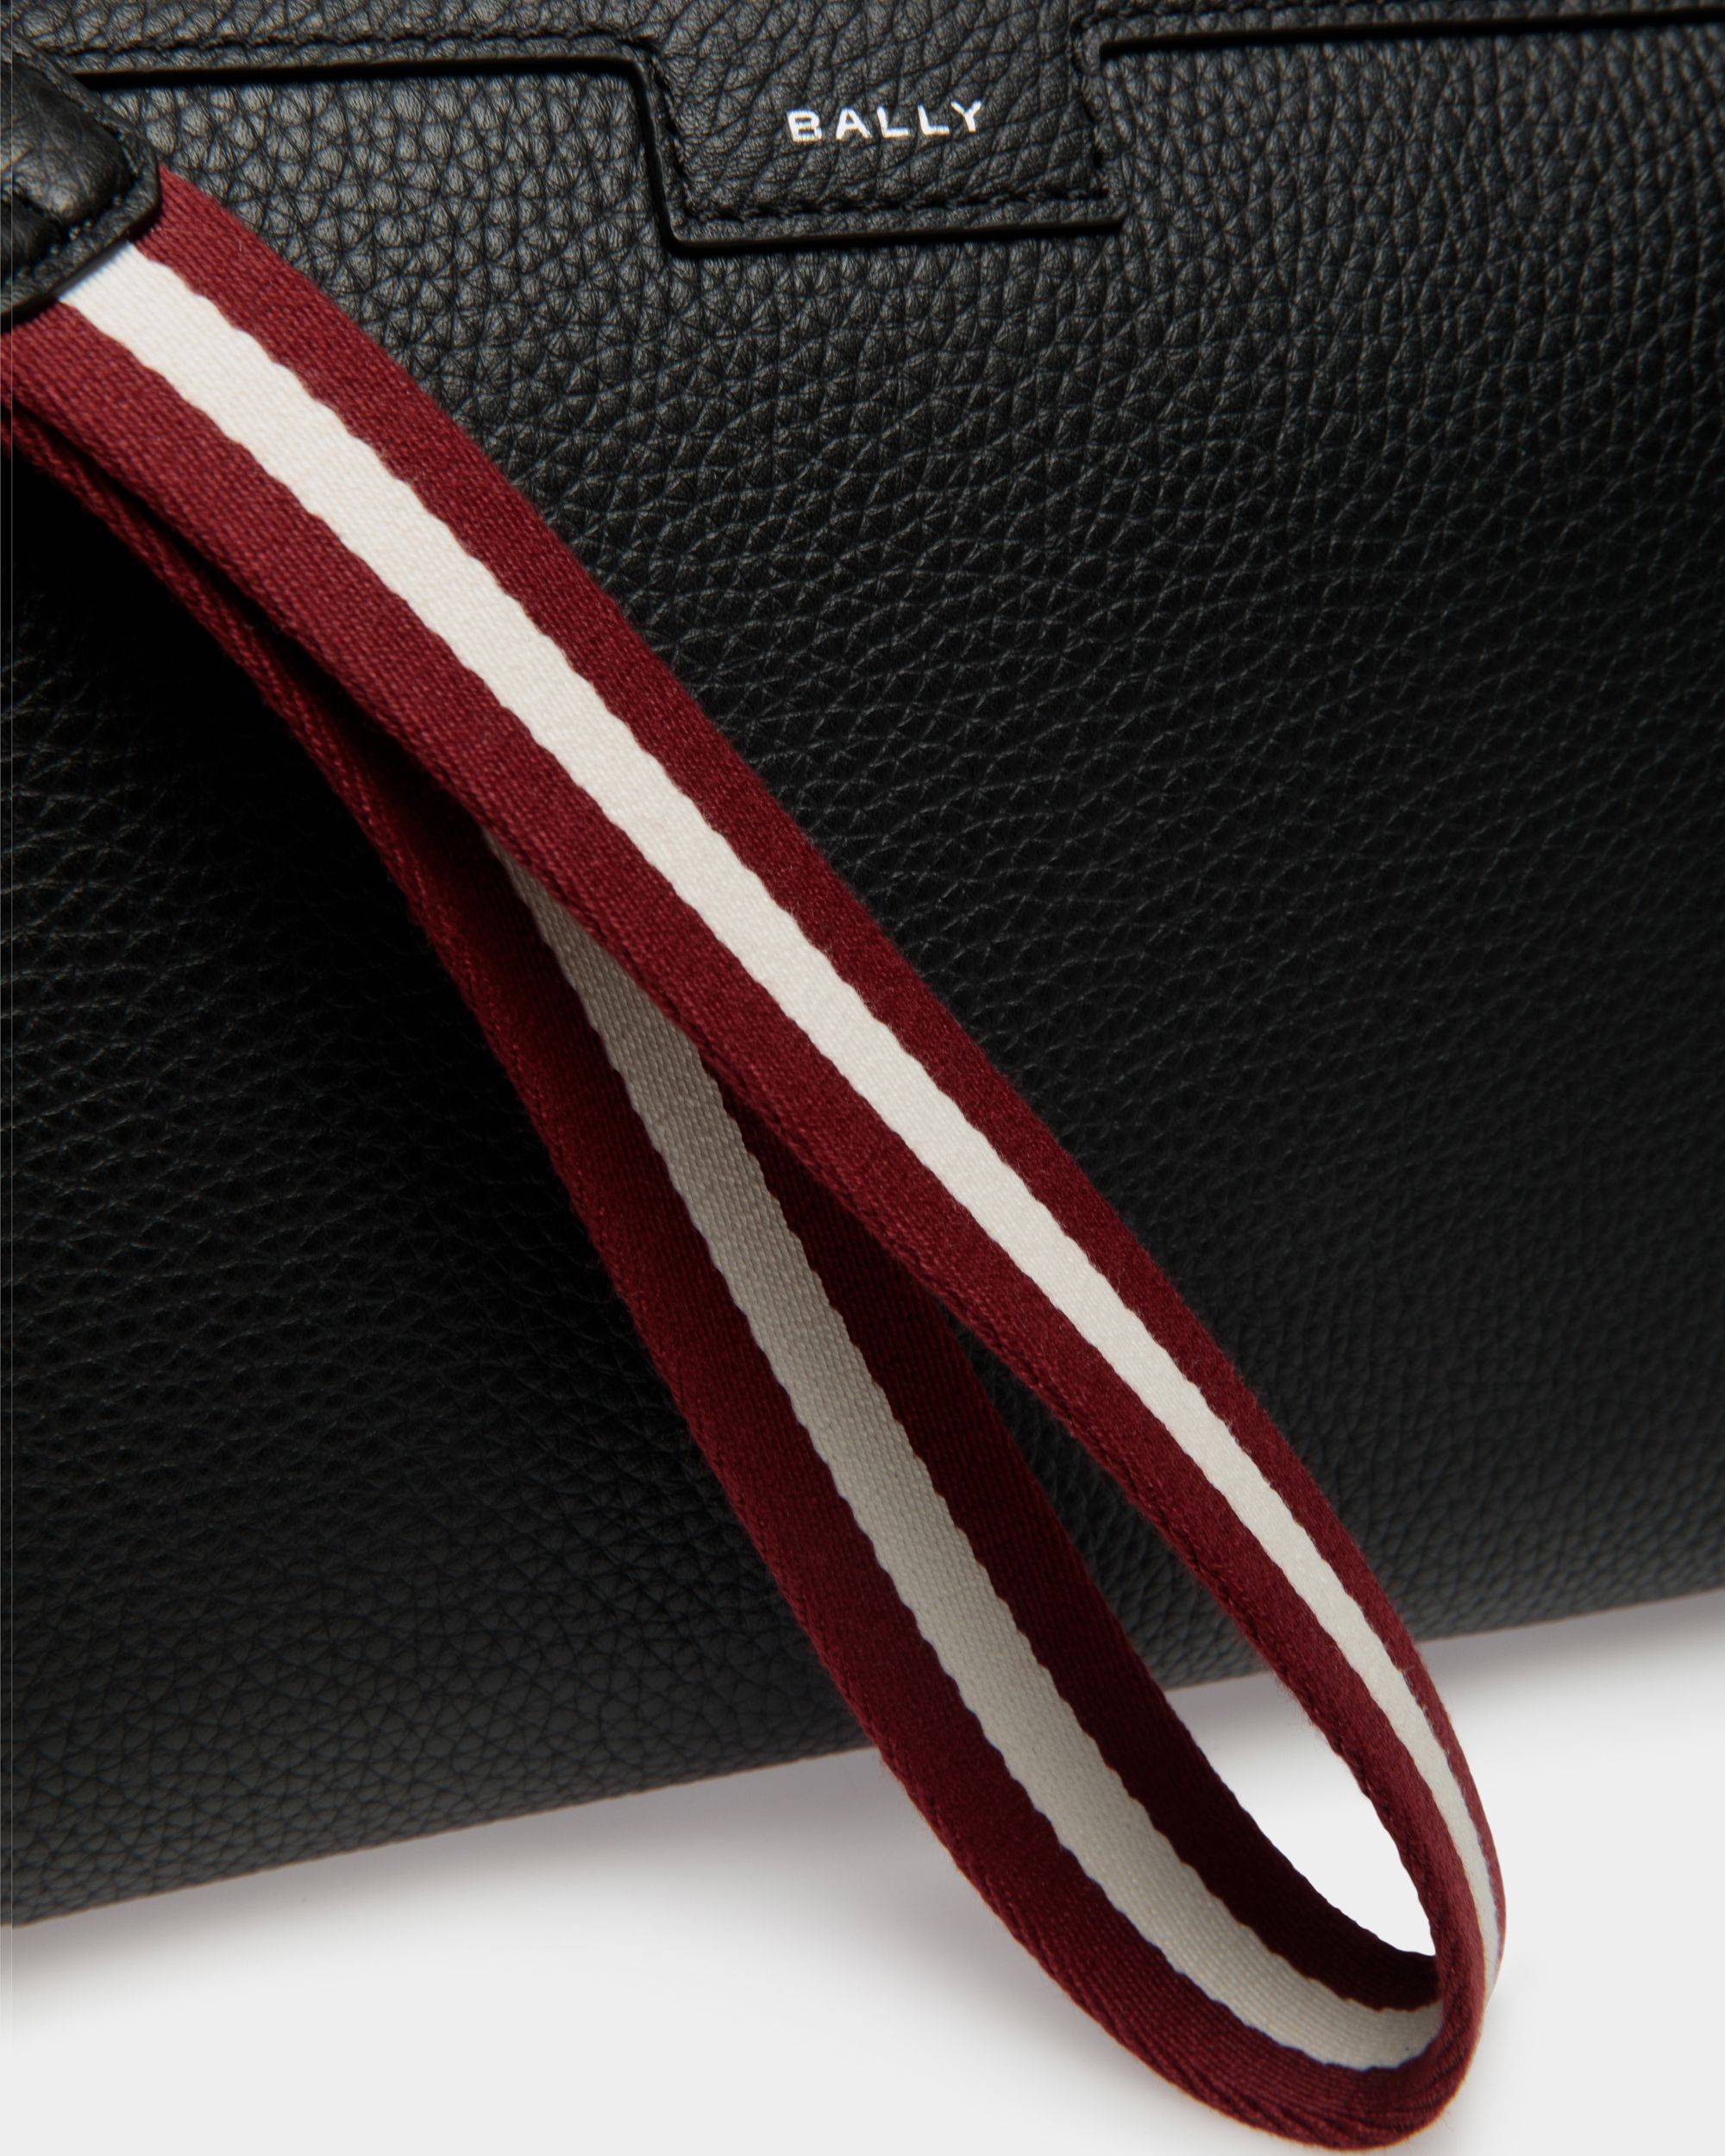 Code | Men's Pouch in Black Grained Leather | Bally | Still Life Detail